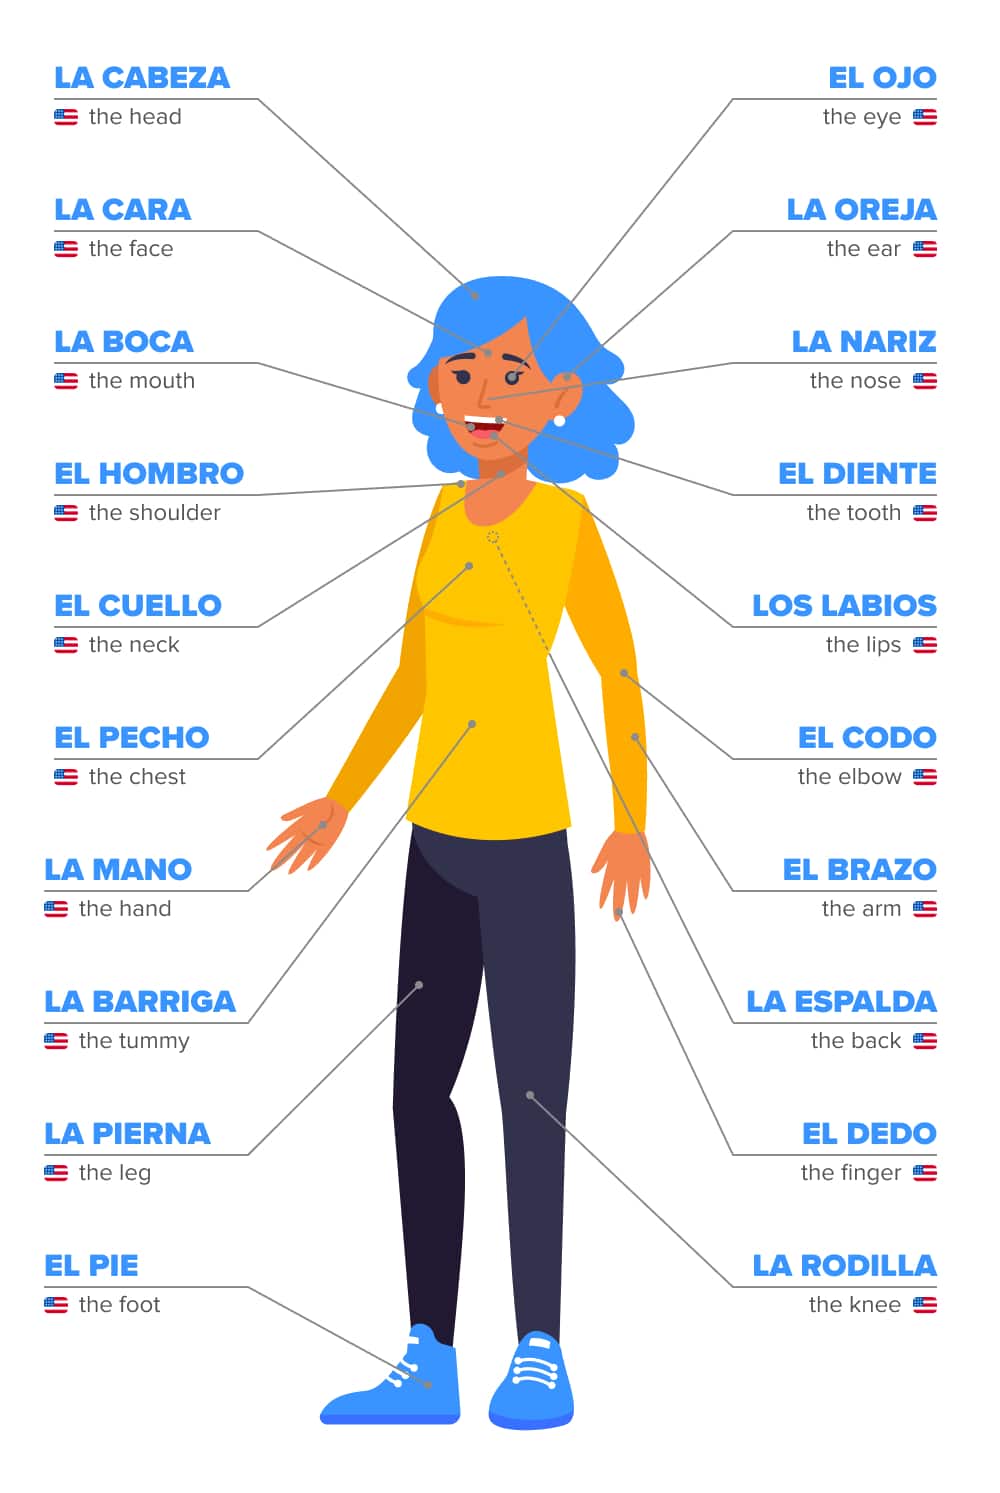 phrases to talk about names in spanish